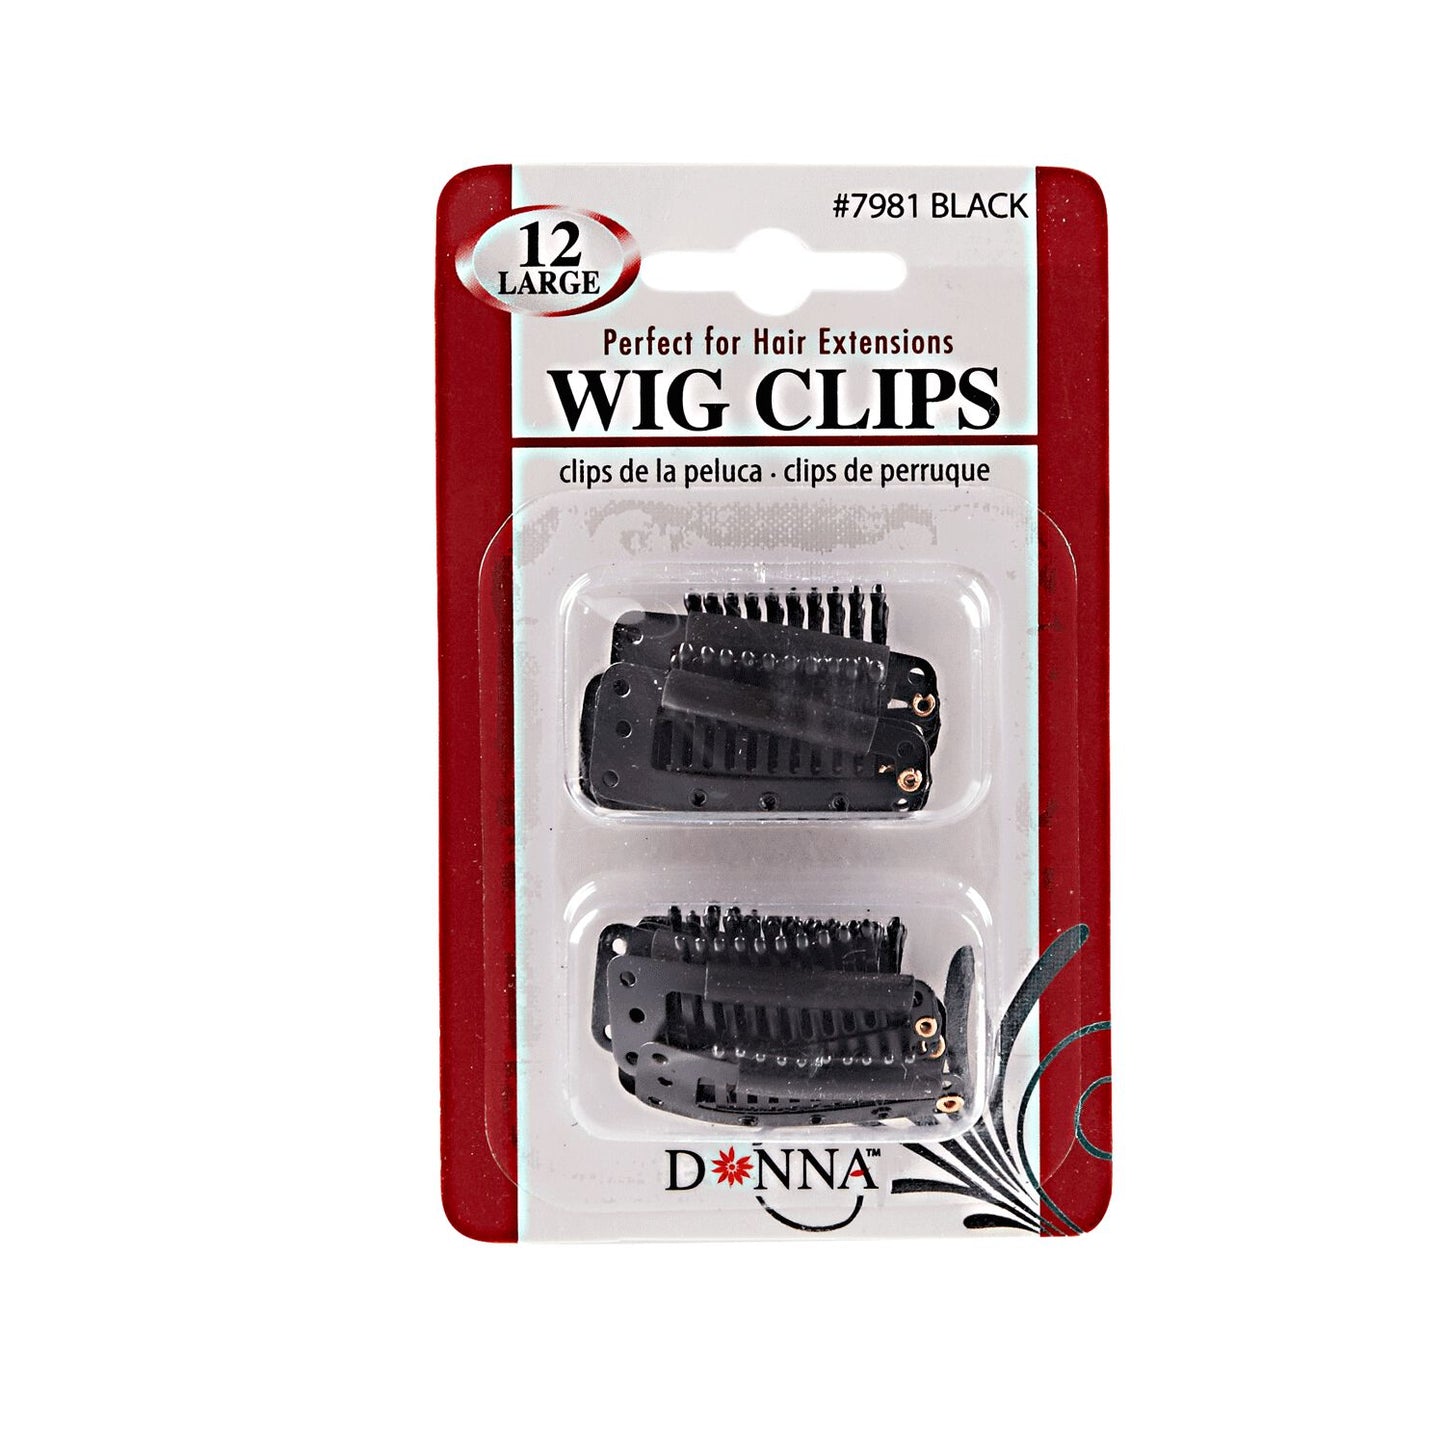 Donna Large Wig Clips